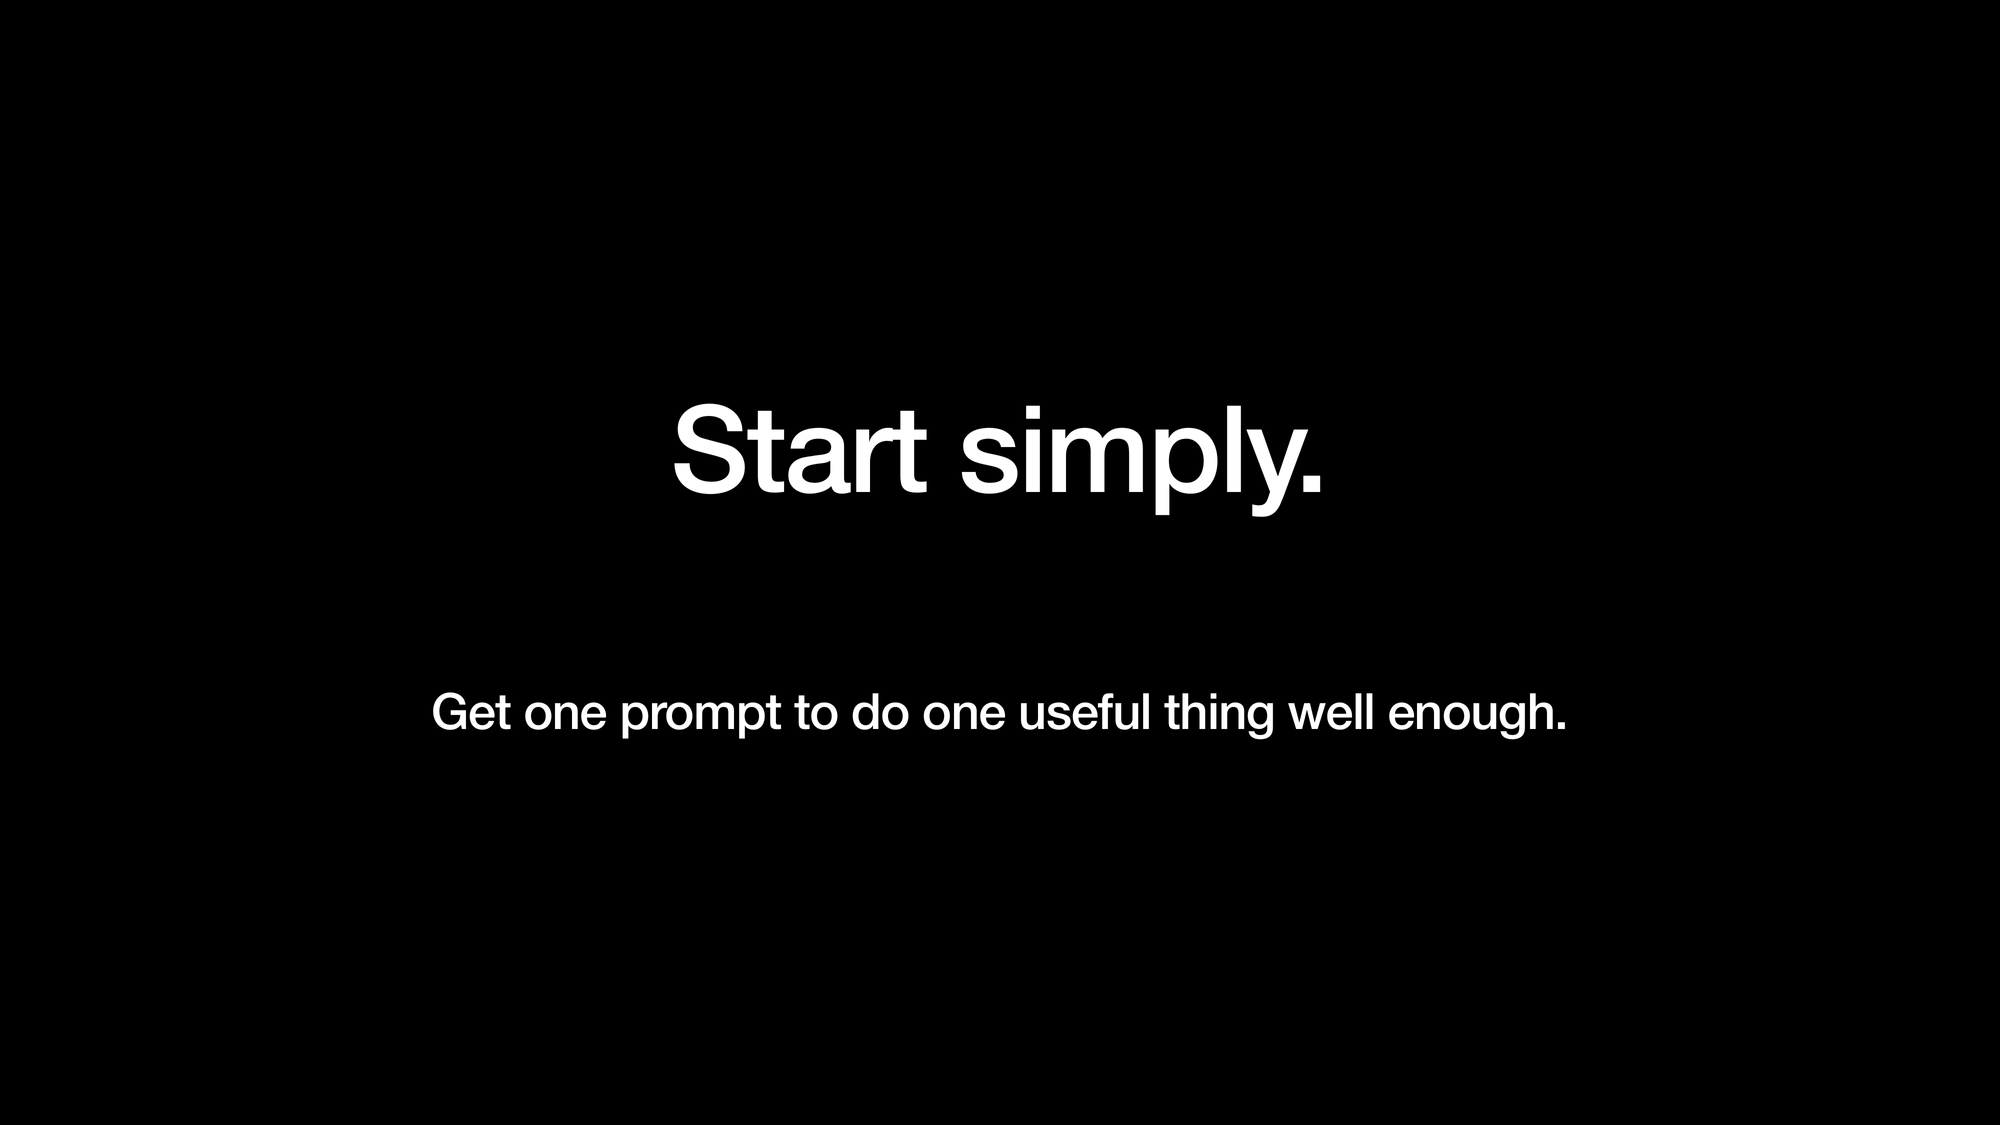 Start simply. Get one prompt to do one useful thing well enough.
